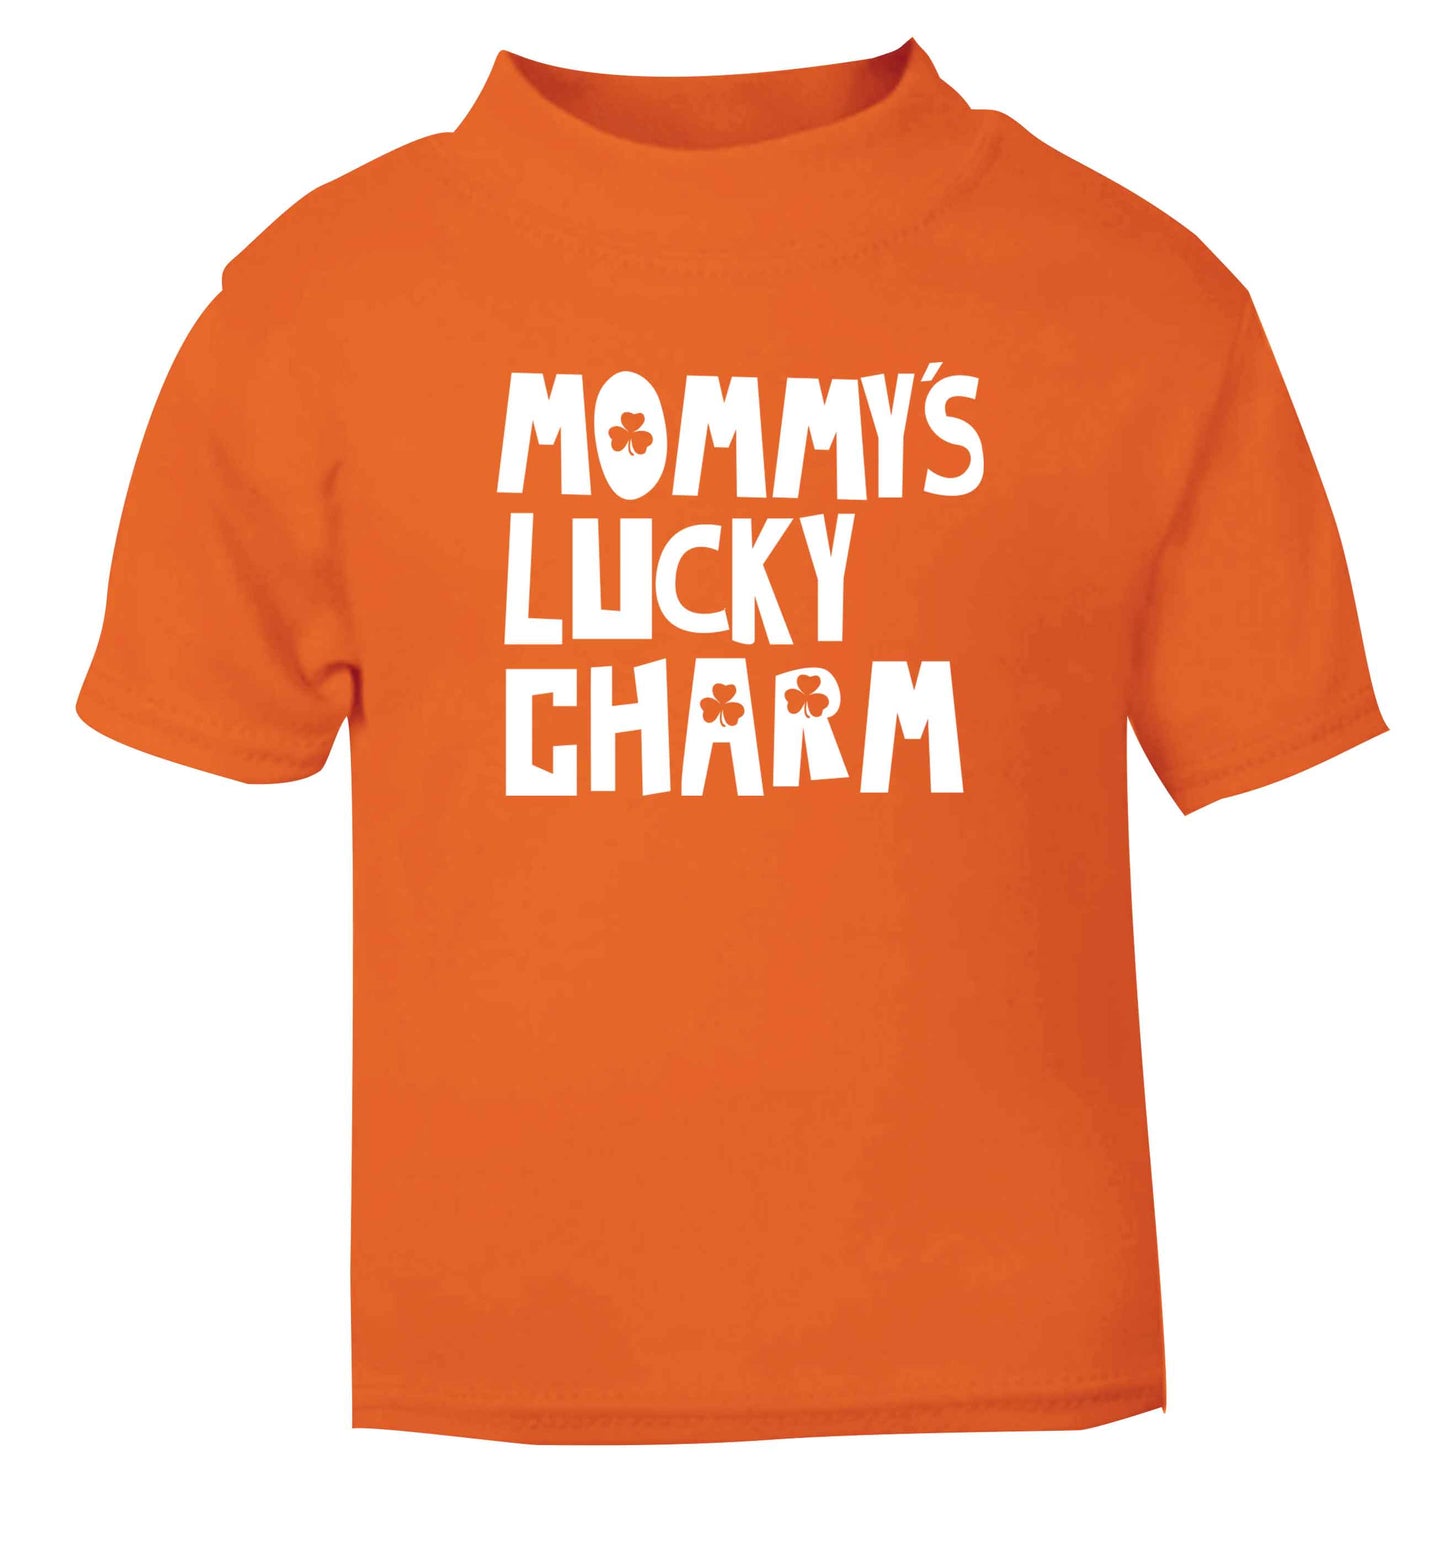 Mommy's lucky charm orange baby toddler Tshirt 2 Years